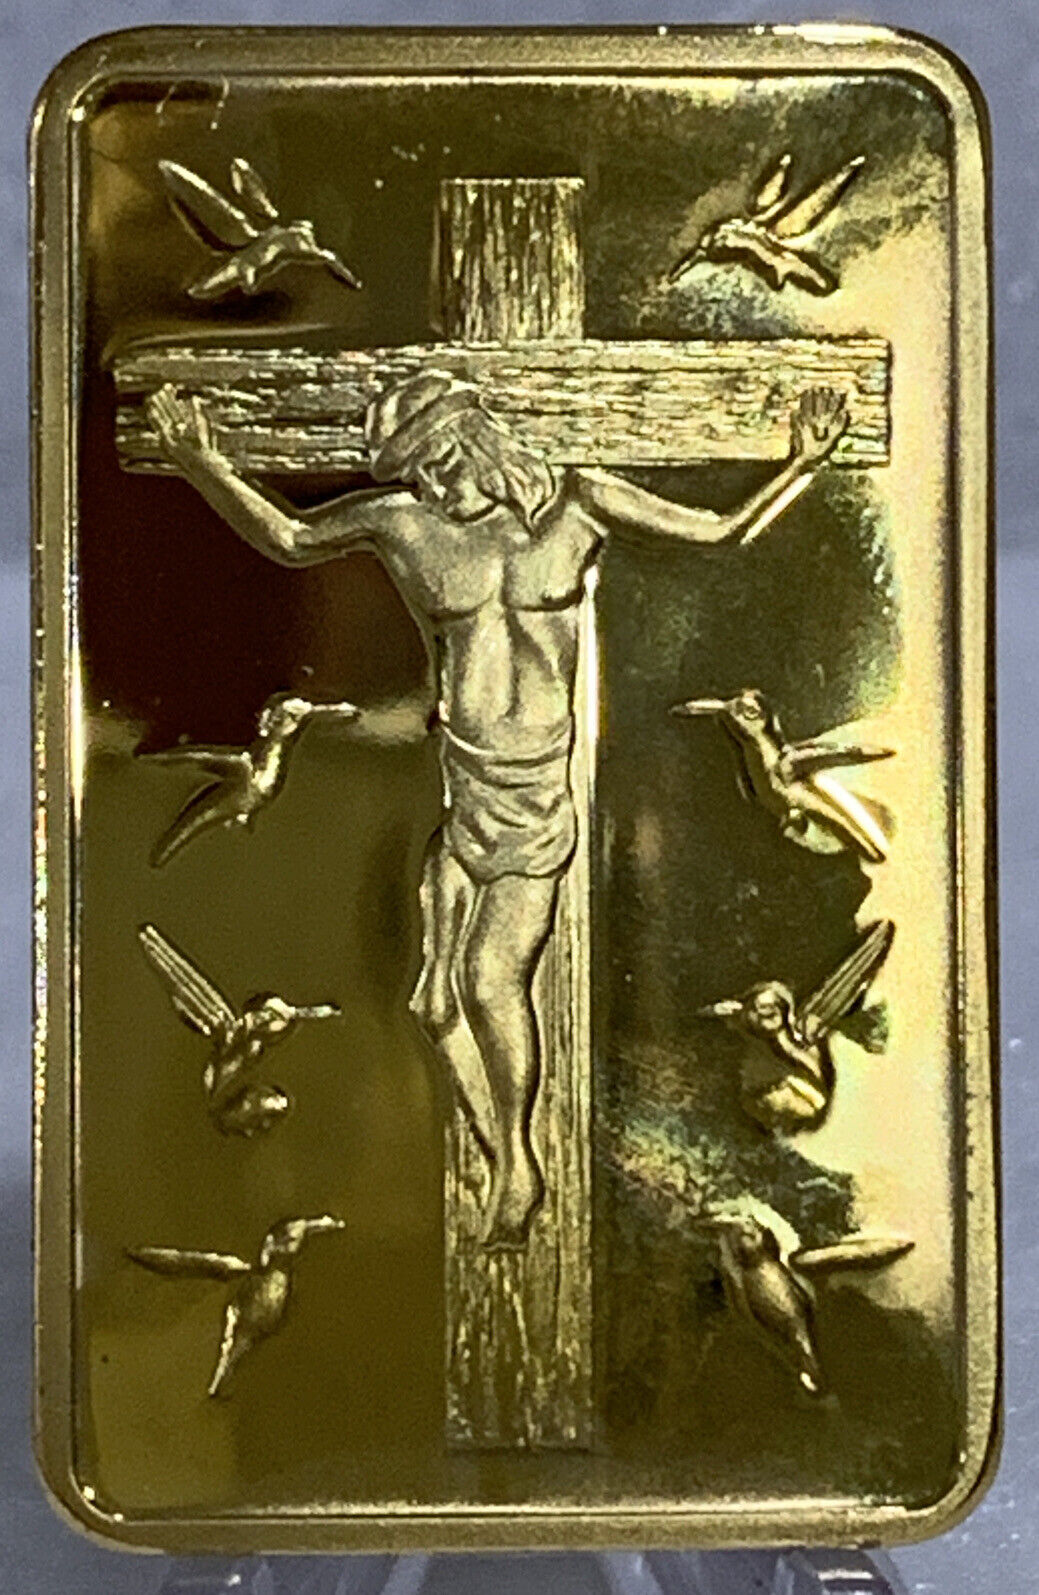 * Jesus Christ Crucified & 10 Commandments Gold Plated Bar Metal Coin In Capsule